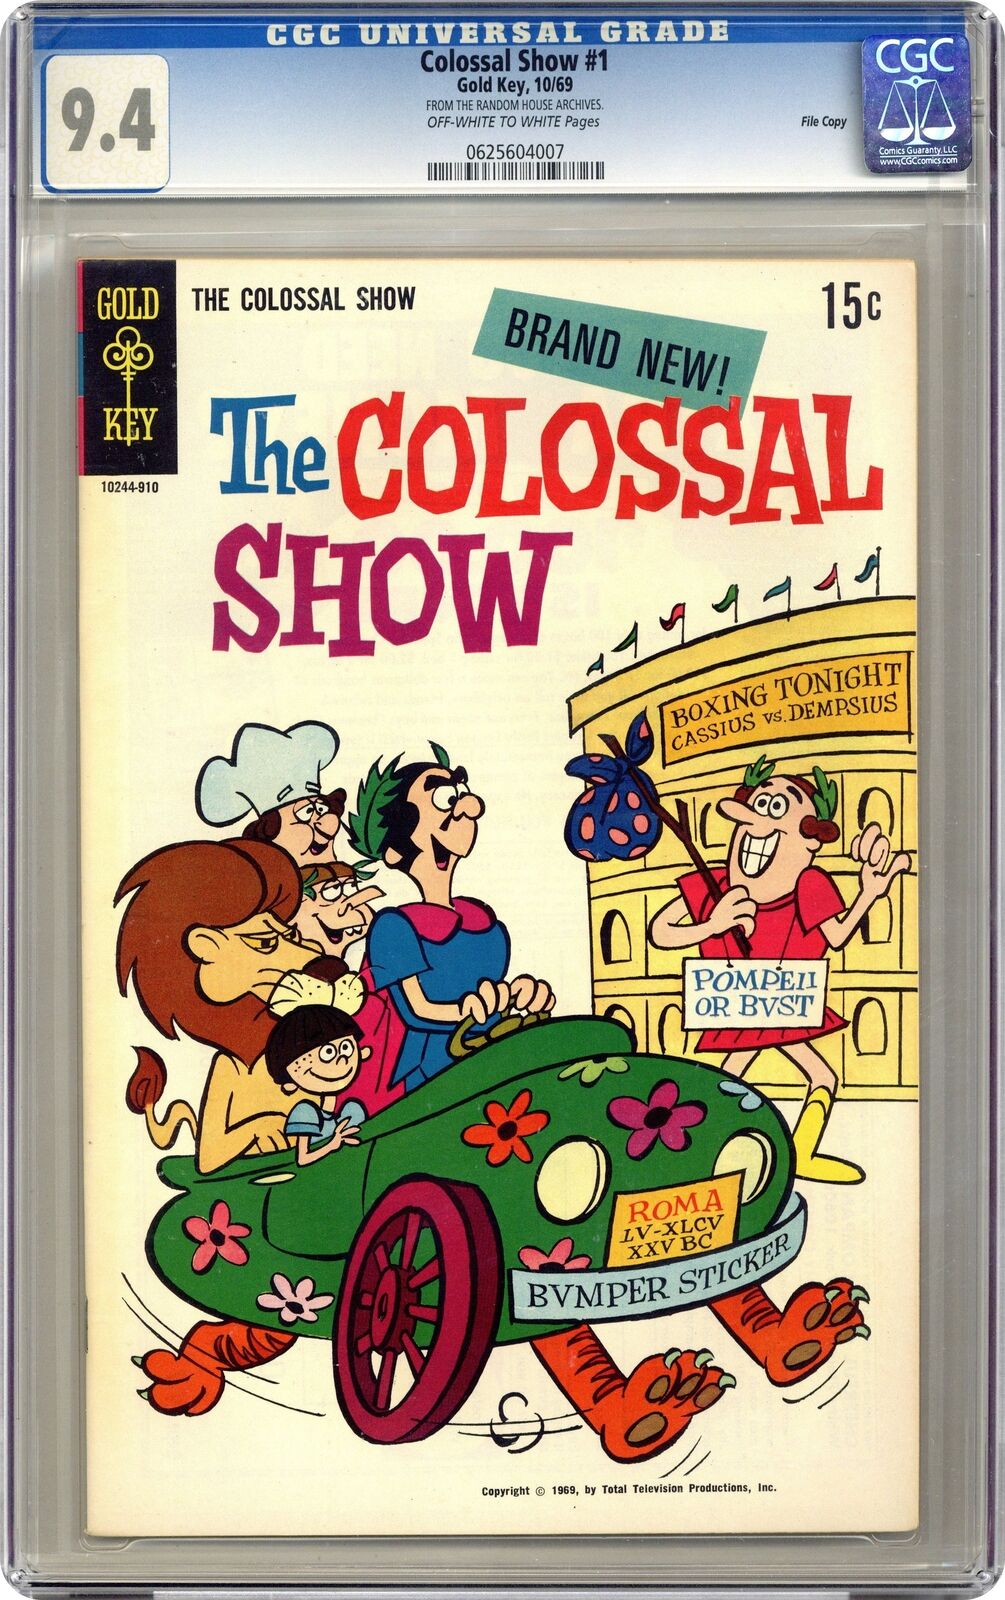 Colossal Show, The #1 CGC 9.4 1969 0625604007